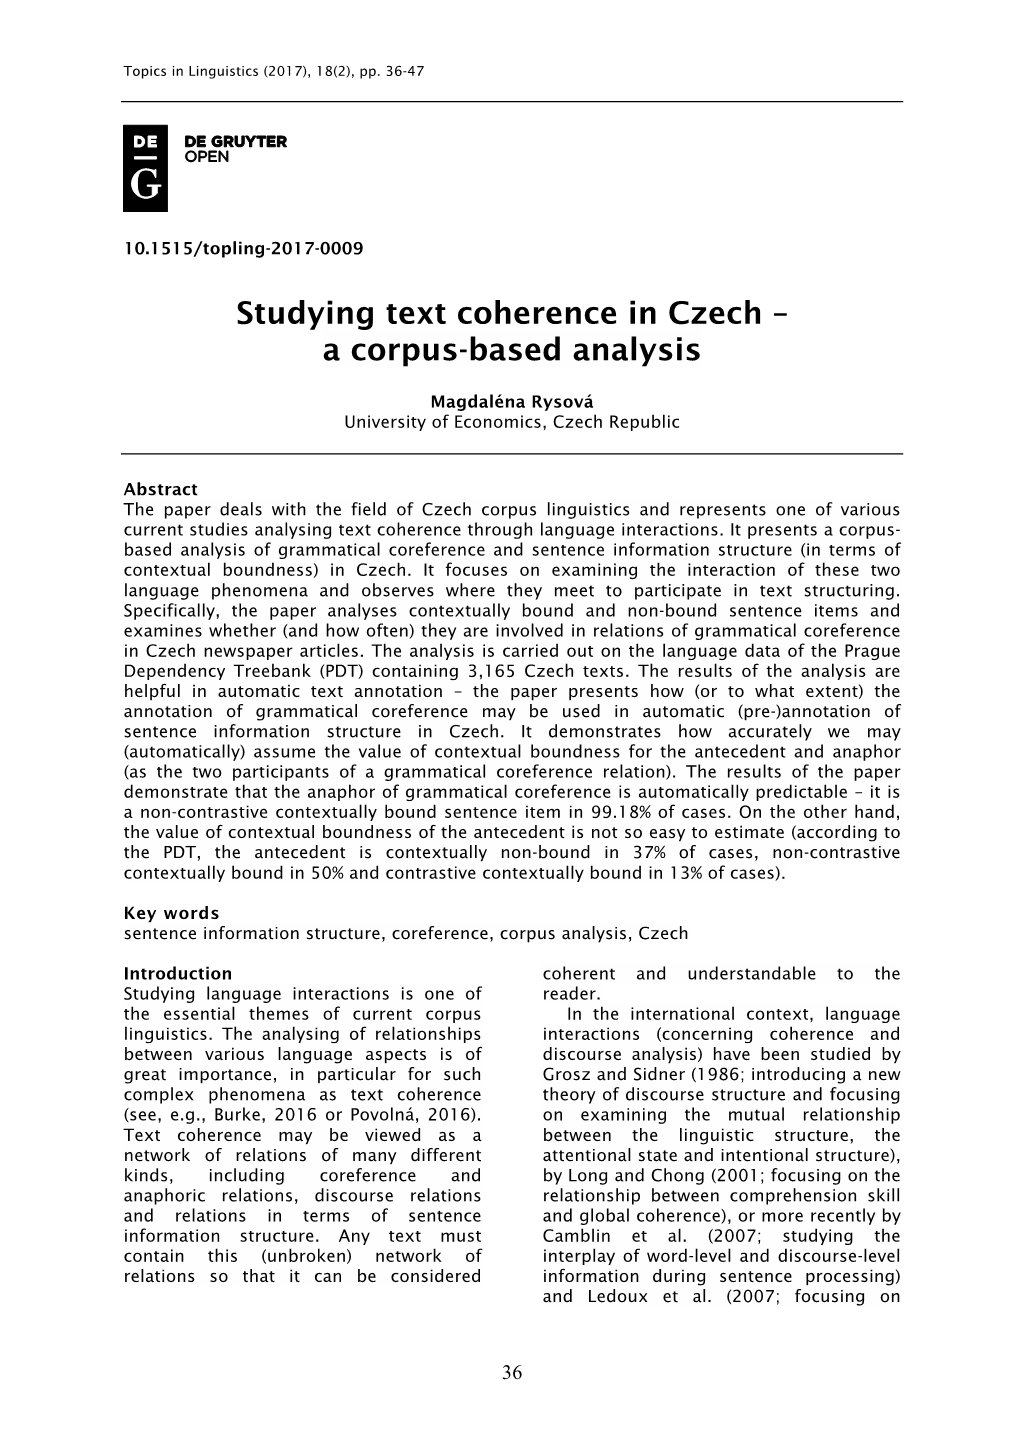 Studying Text Coherence in Czech – a Corpus-Based Analysis